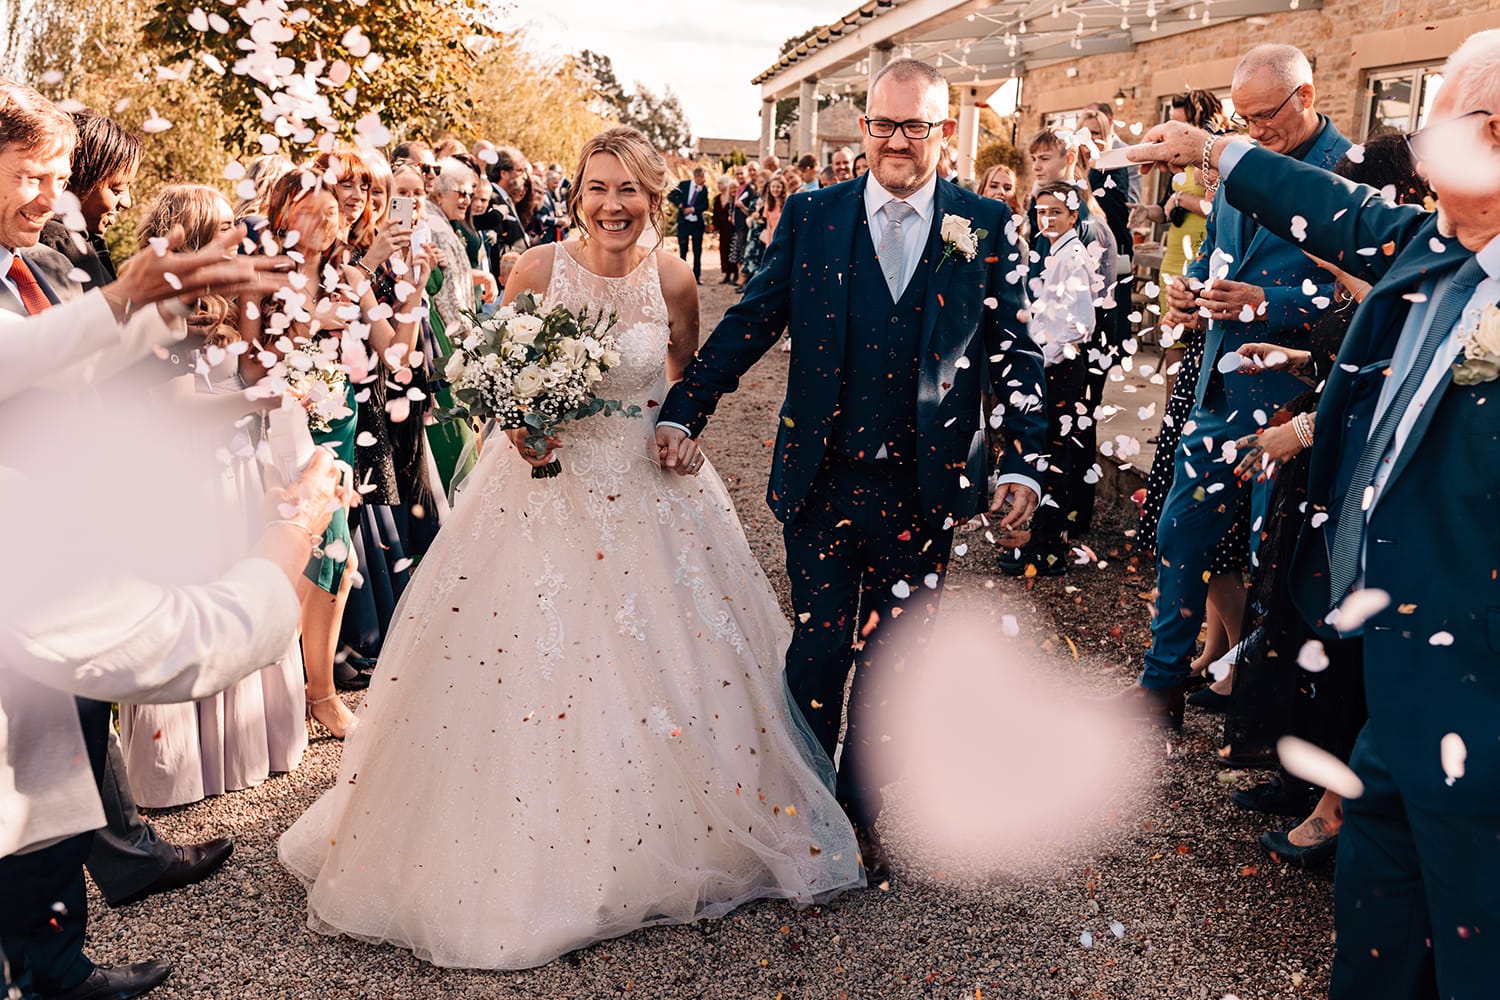 Bride and Groom walking under a shower of confetti thrown by their guests